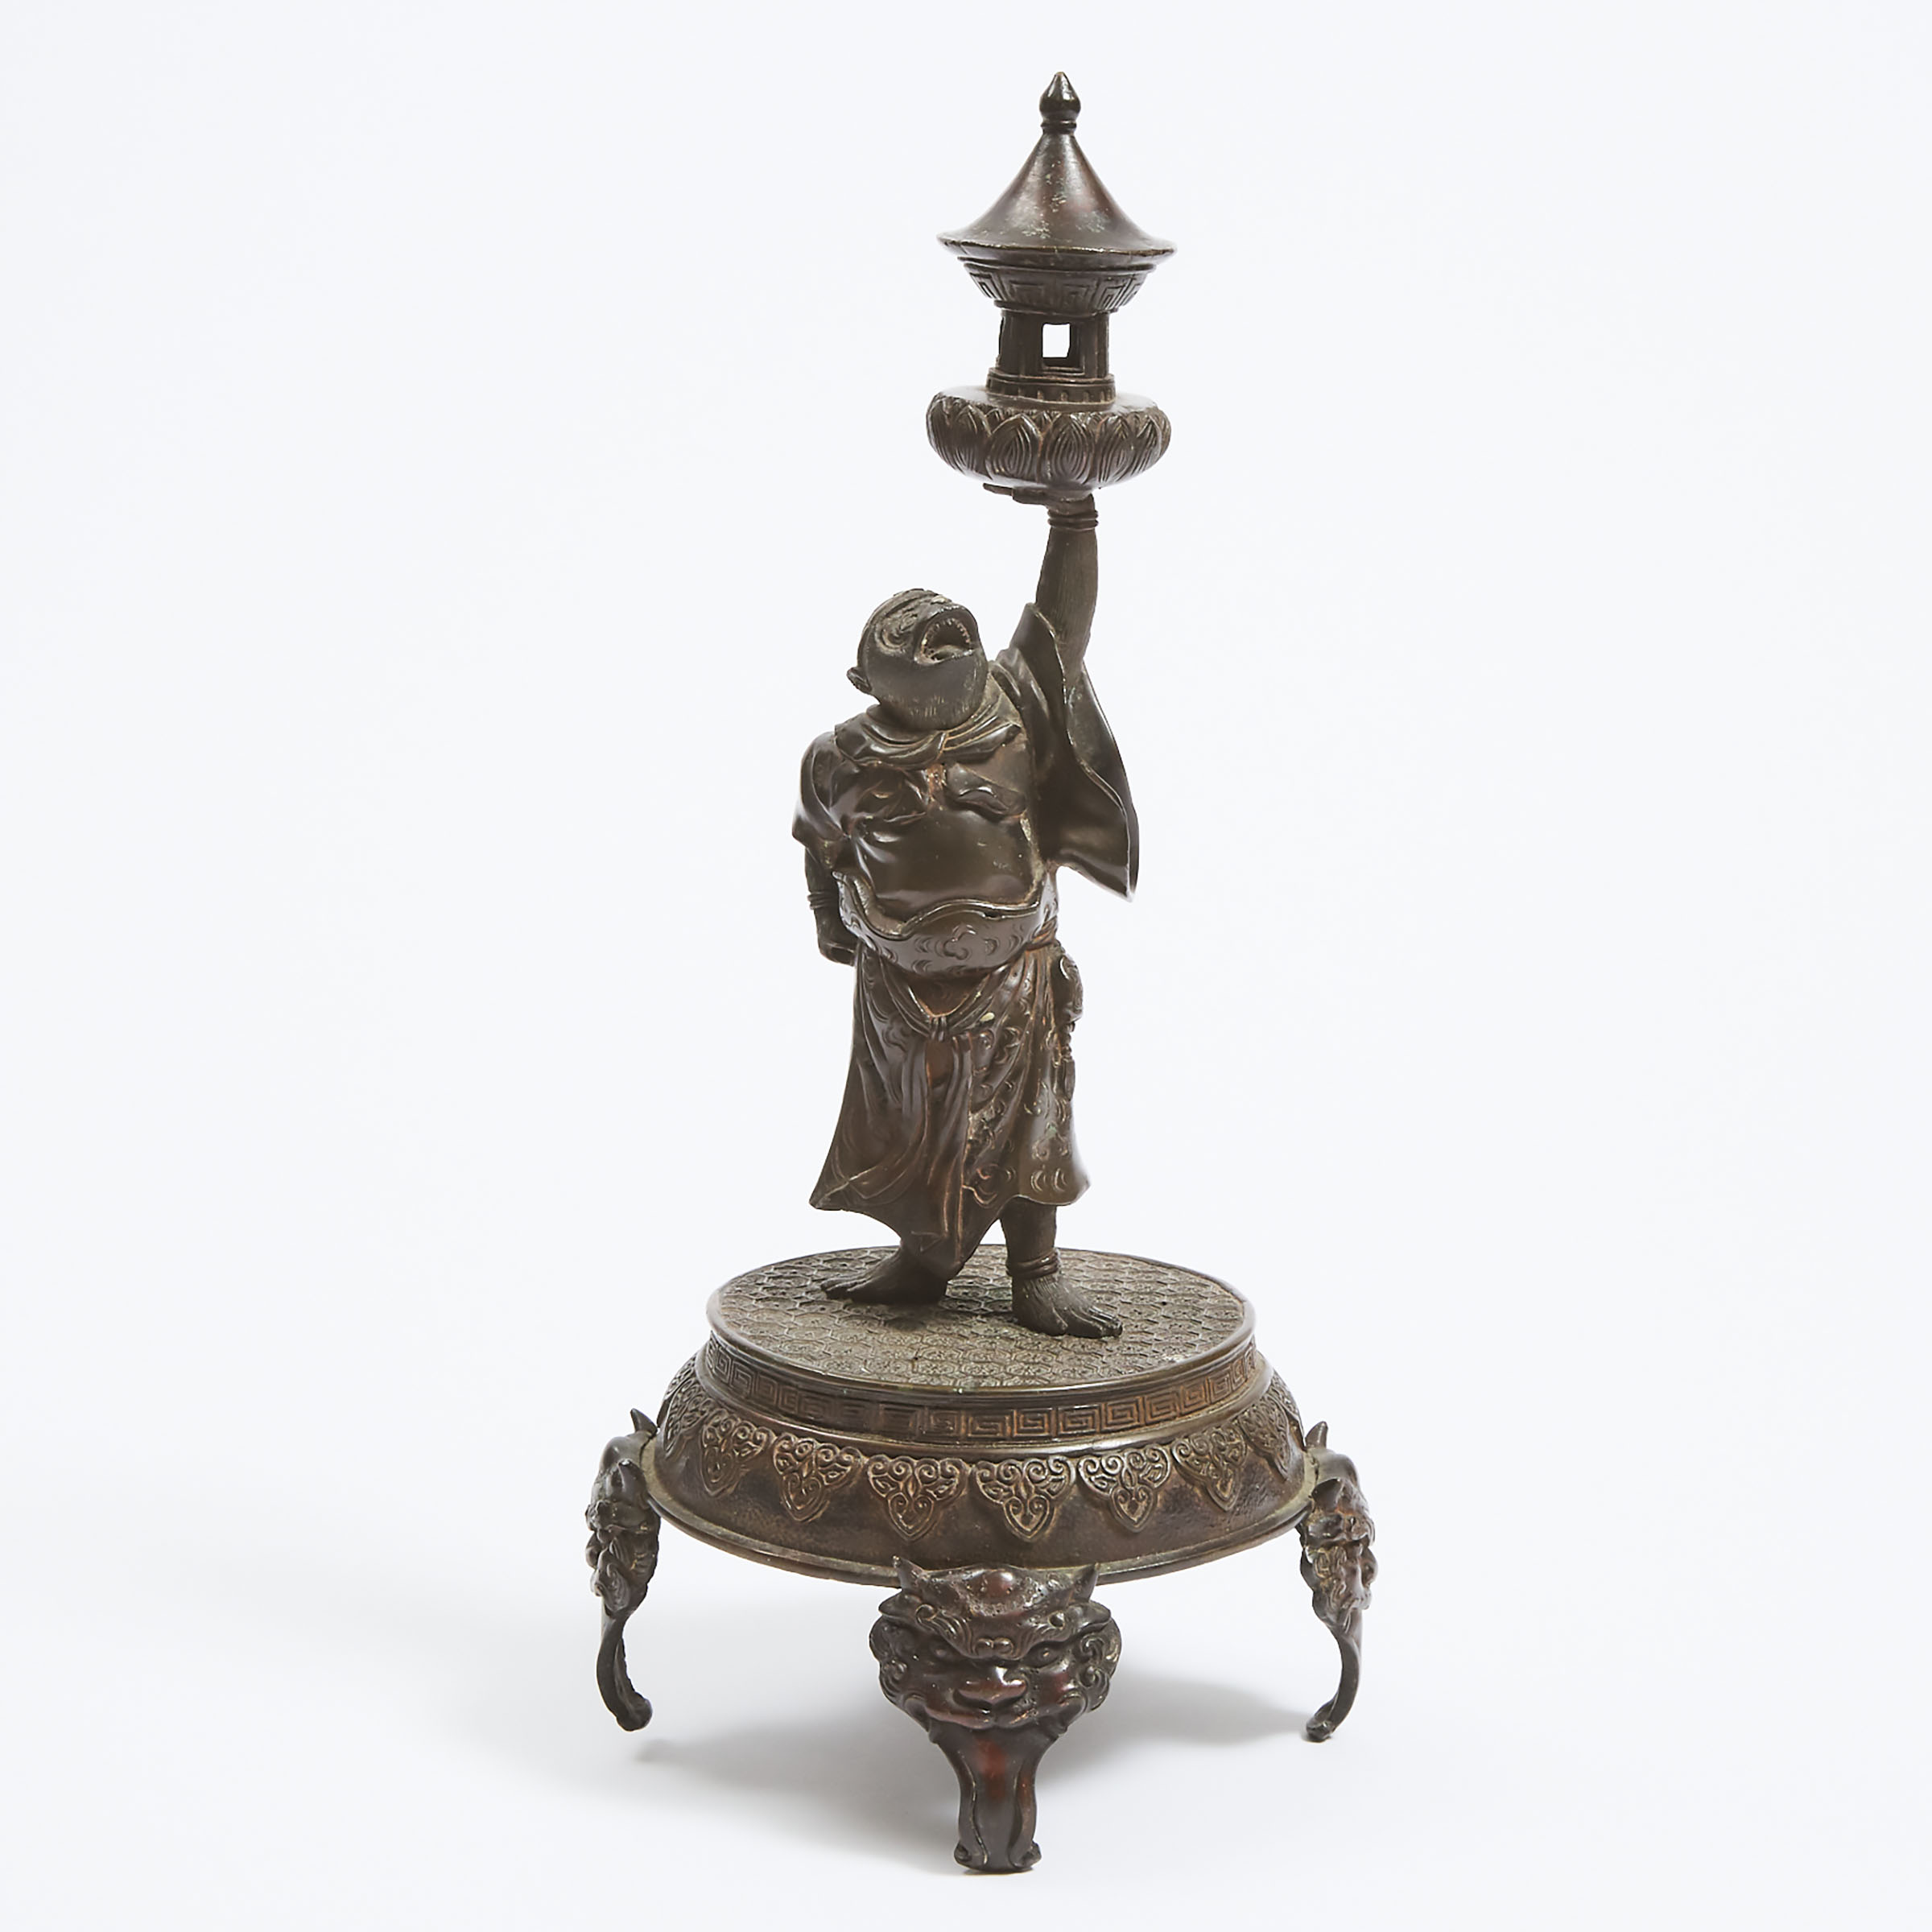 A Bronze Candlestick of the Monkey 3ac250